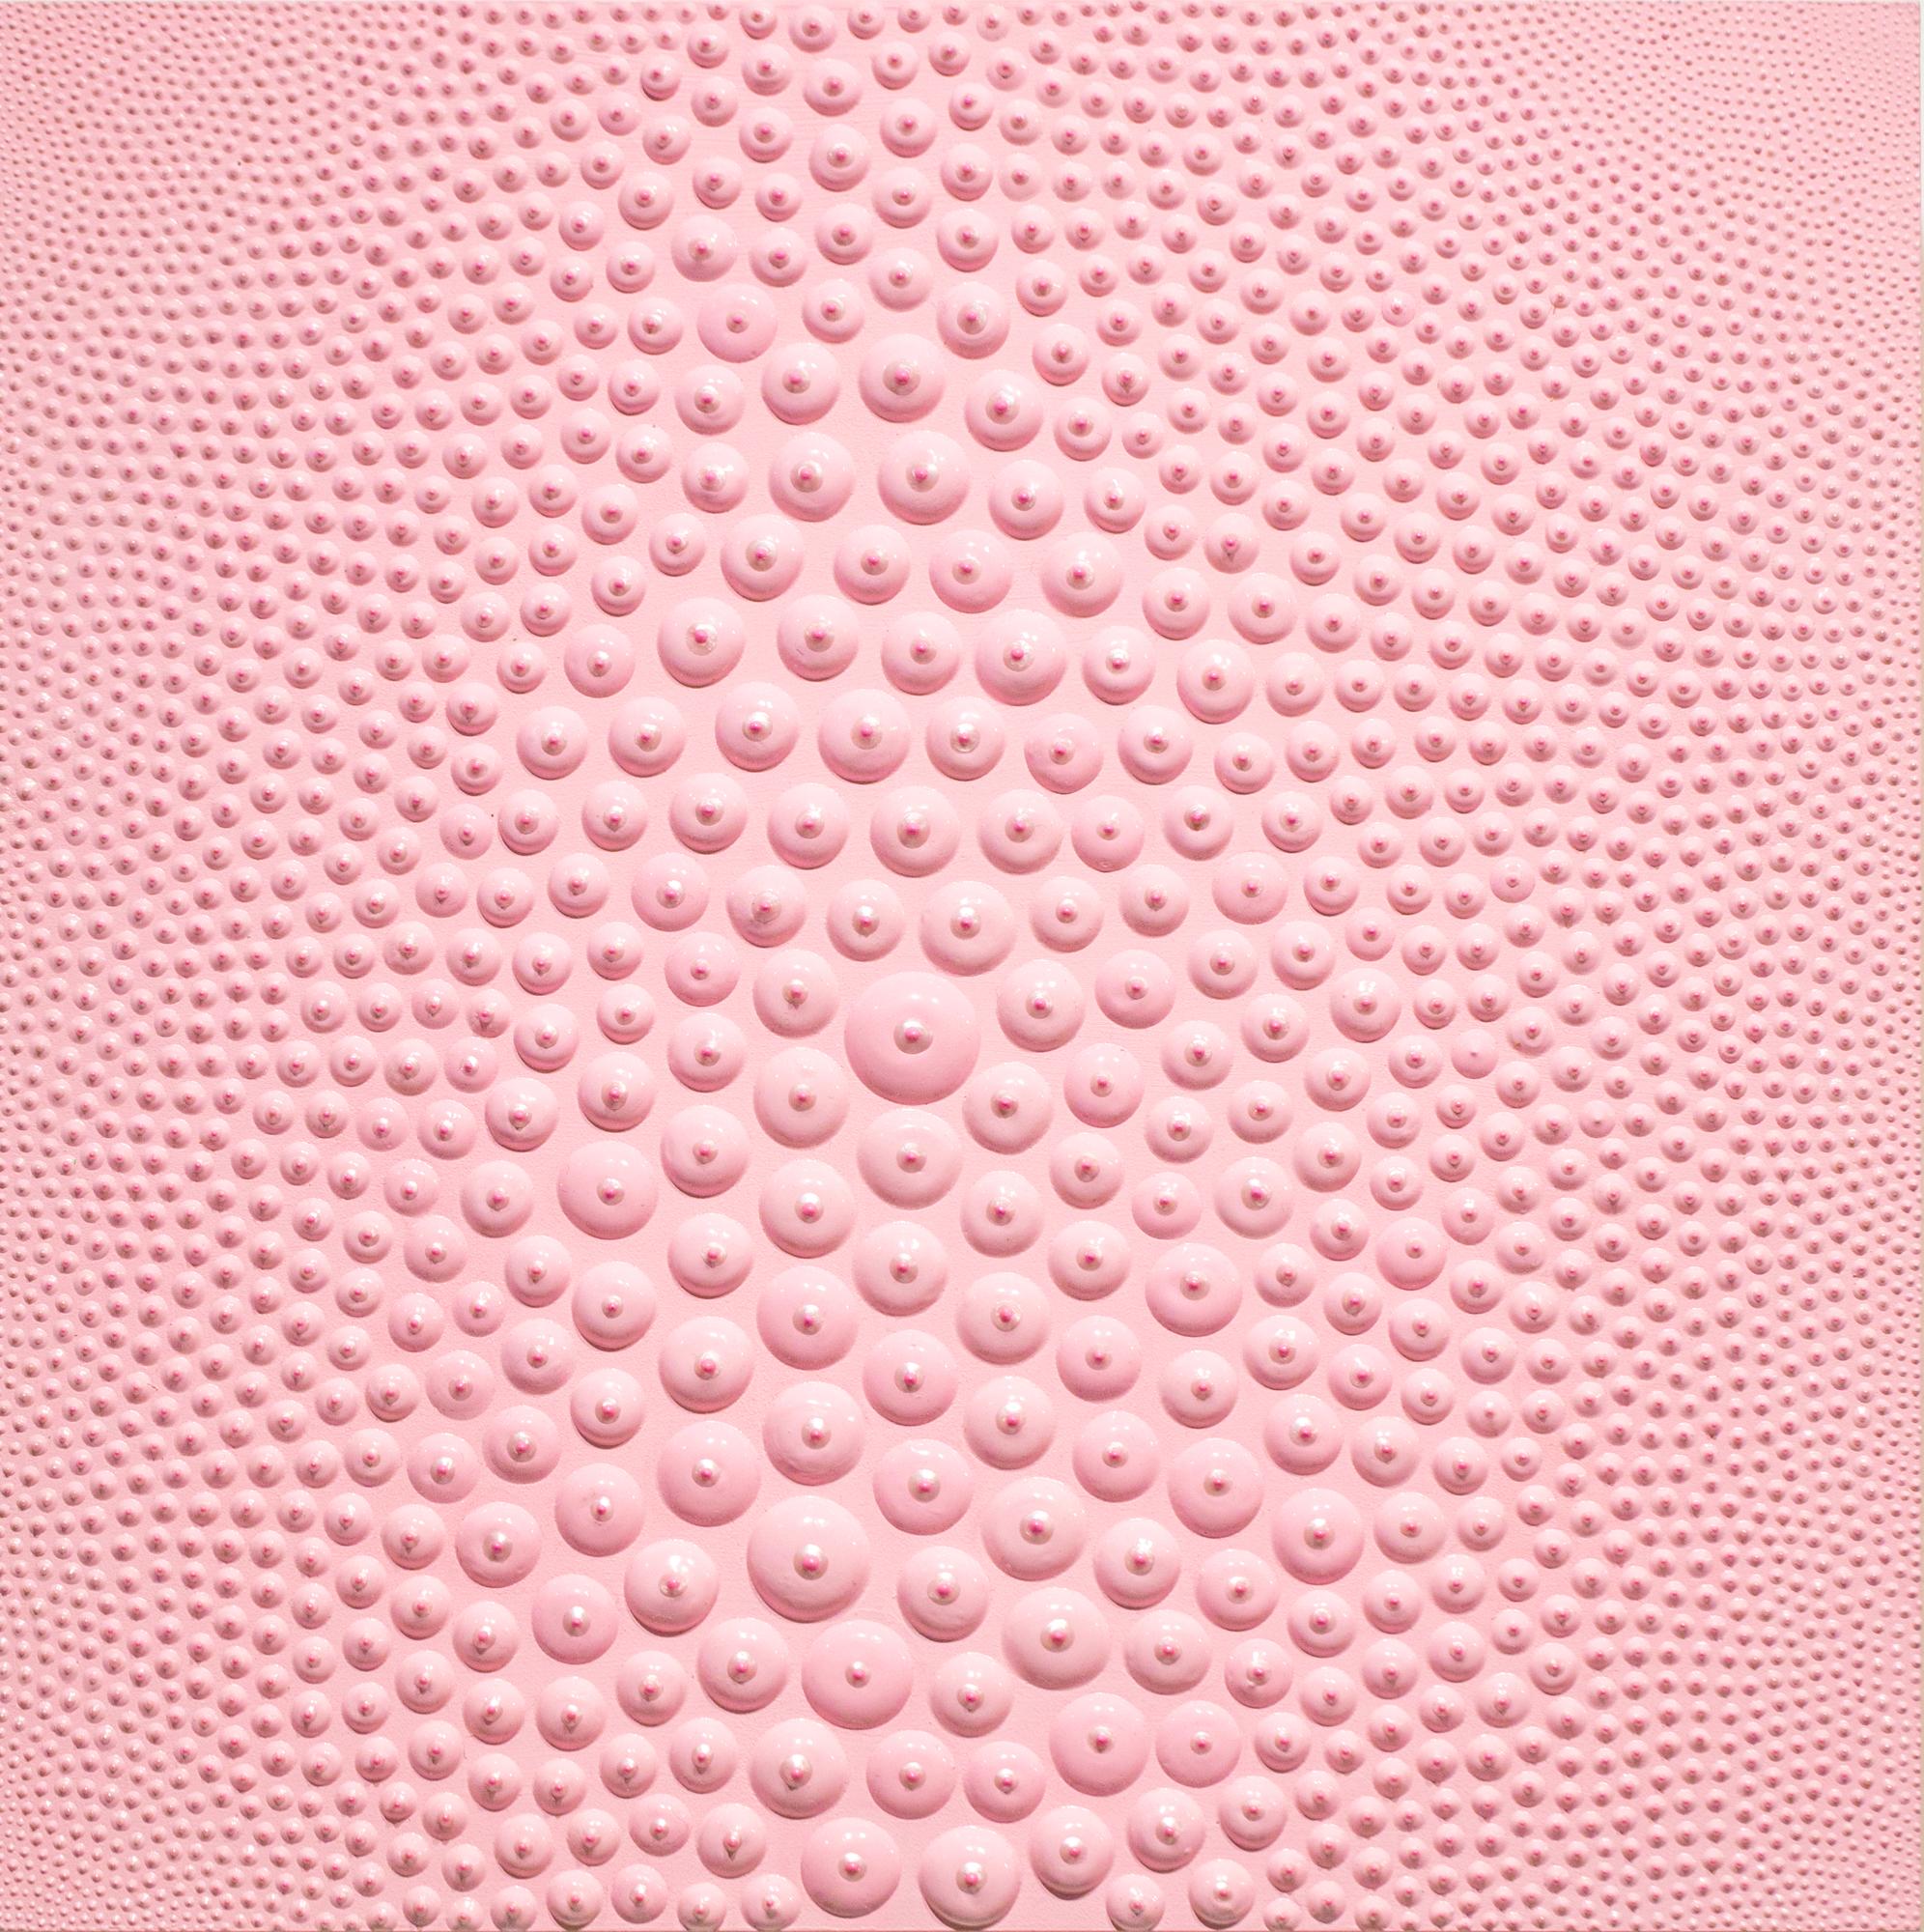 PJ Linden Abstract Painting - "Nipple Ballet", Acrylic Three Dimensional Pink Abstract Nipple Pattern Painting